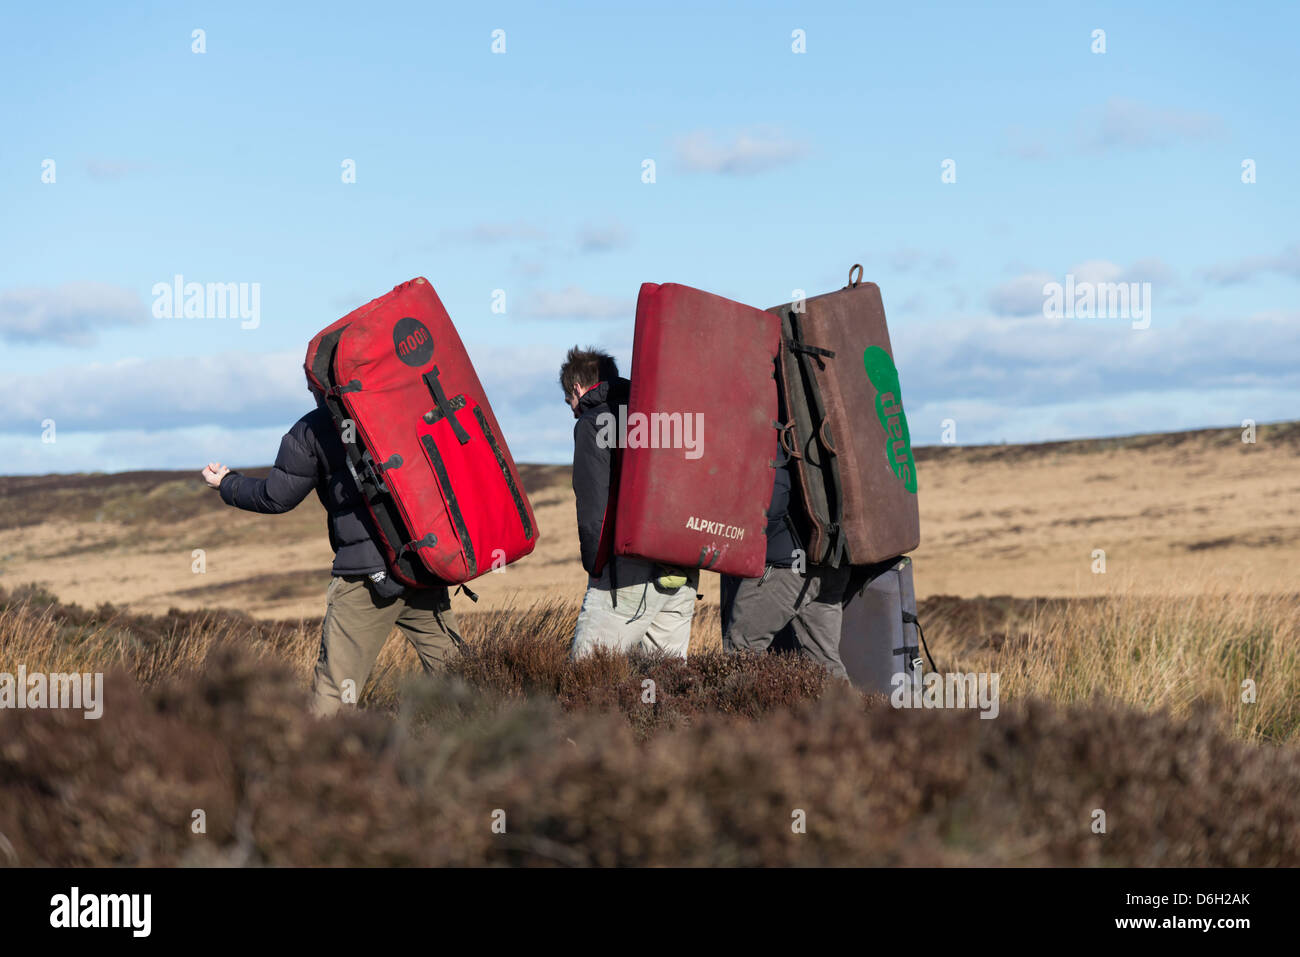 Group of men carrying bouldering mats or crash pads used for safety on short climbs Derbyshire UK Stock Photo